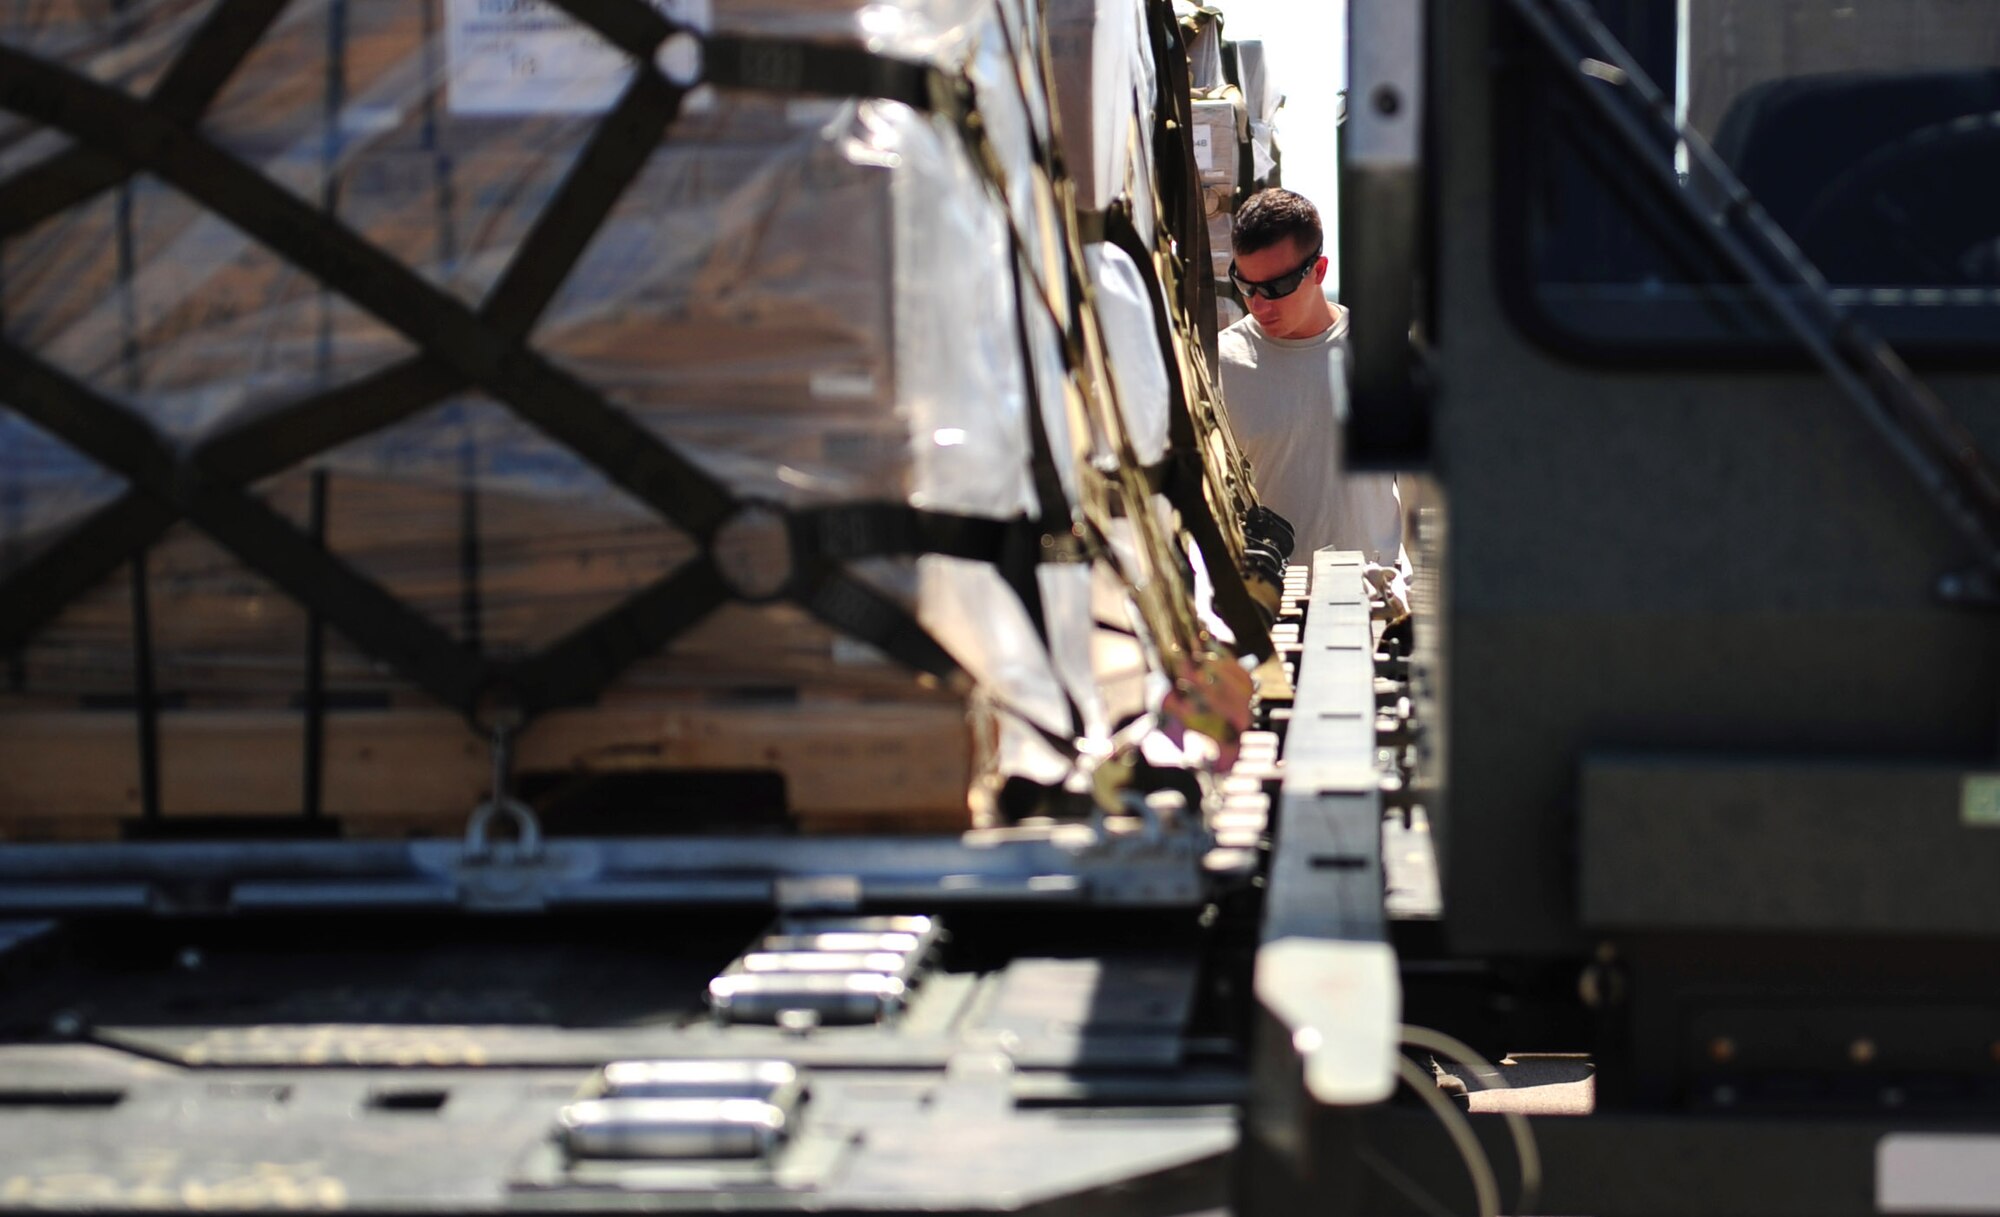 U.S. Air Force Staff Sgt. Eric Hazelwood, 7th Logistics Readiness Squadron air transportation craftsman, prepares to load pallets at Dyess Air Force Base, Texas, Sept. 20, 2016. This cargo was donated from Global Samaritan Resources based in Abilene, Texas, and the food will be transported to an air base near Erbil, Iraq, for distribution to Iraqi refugees. (U.S. Air Force photo by Airman 1st Class April Lancto)